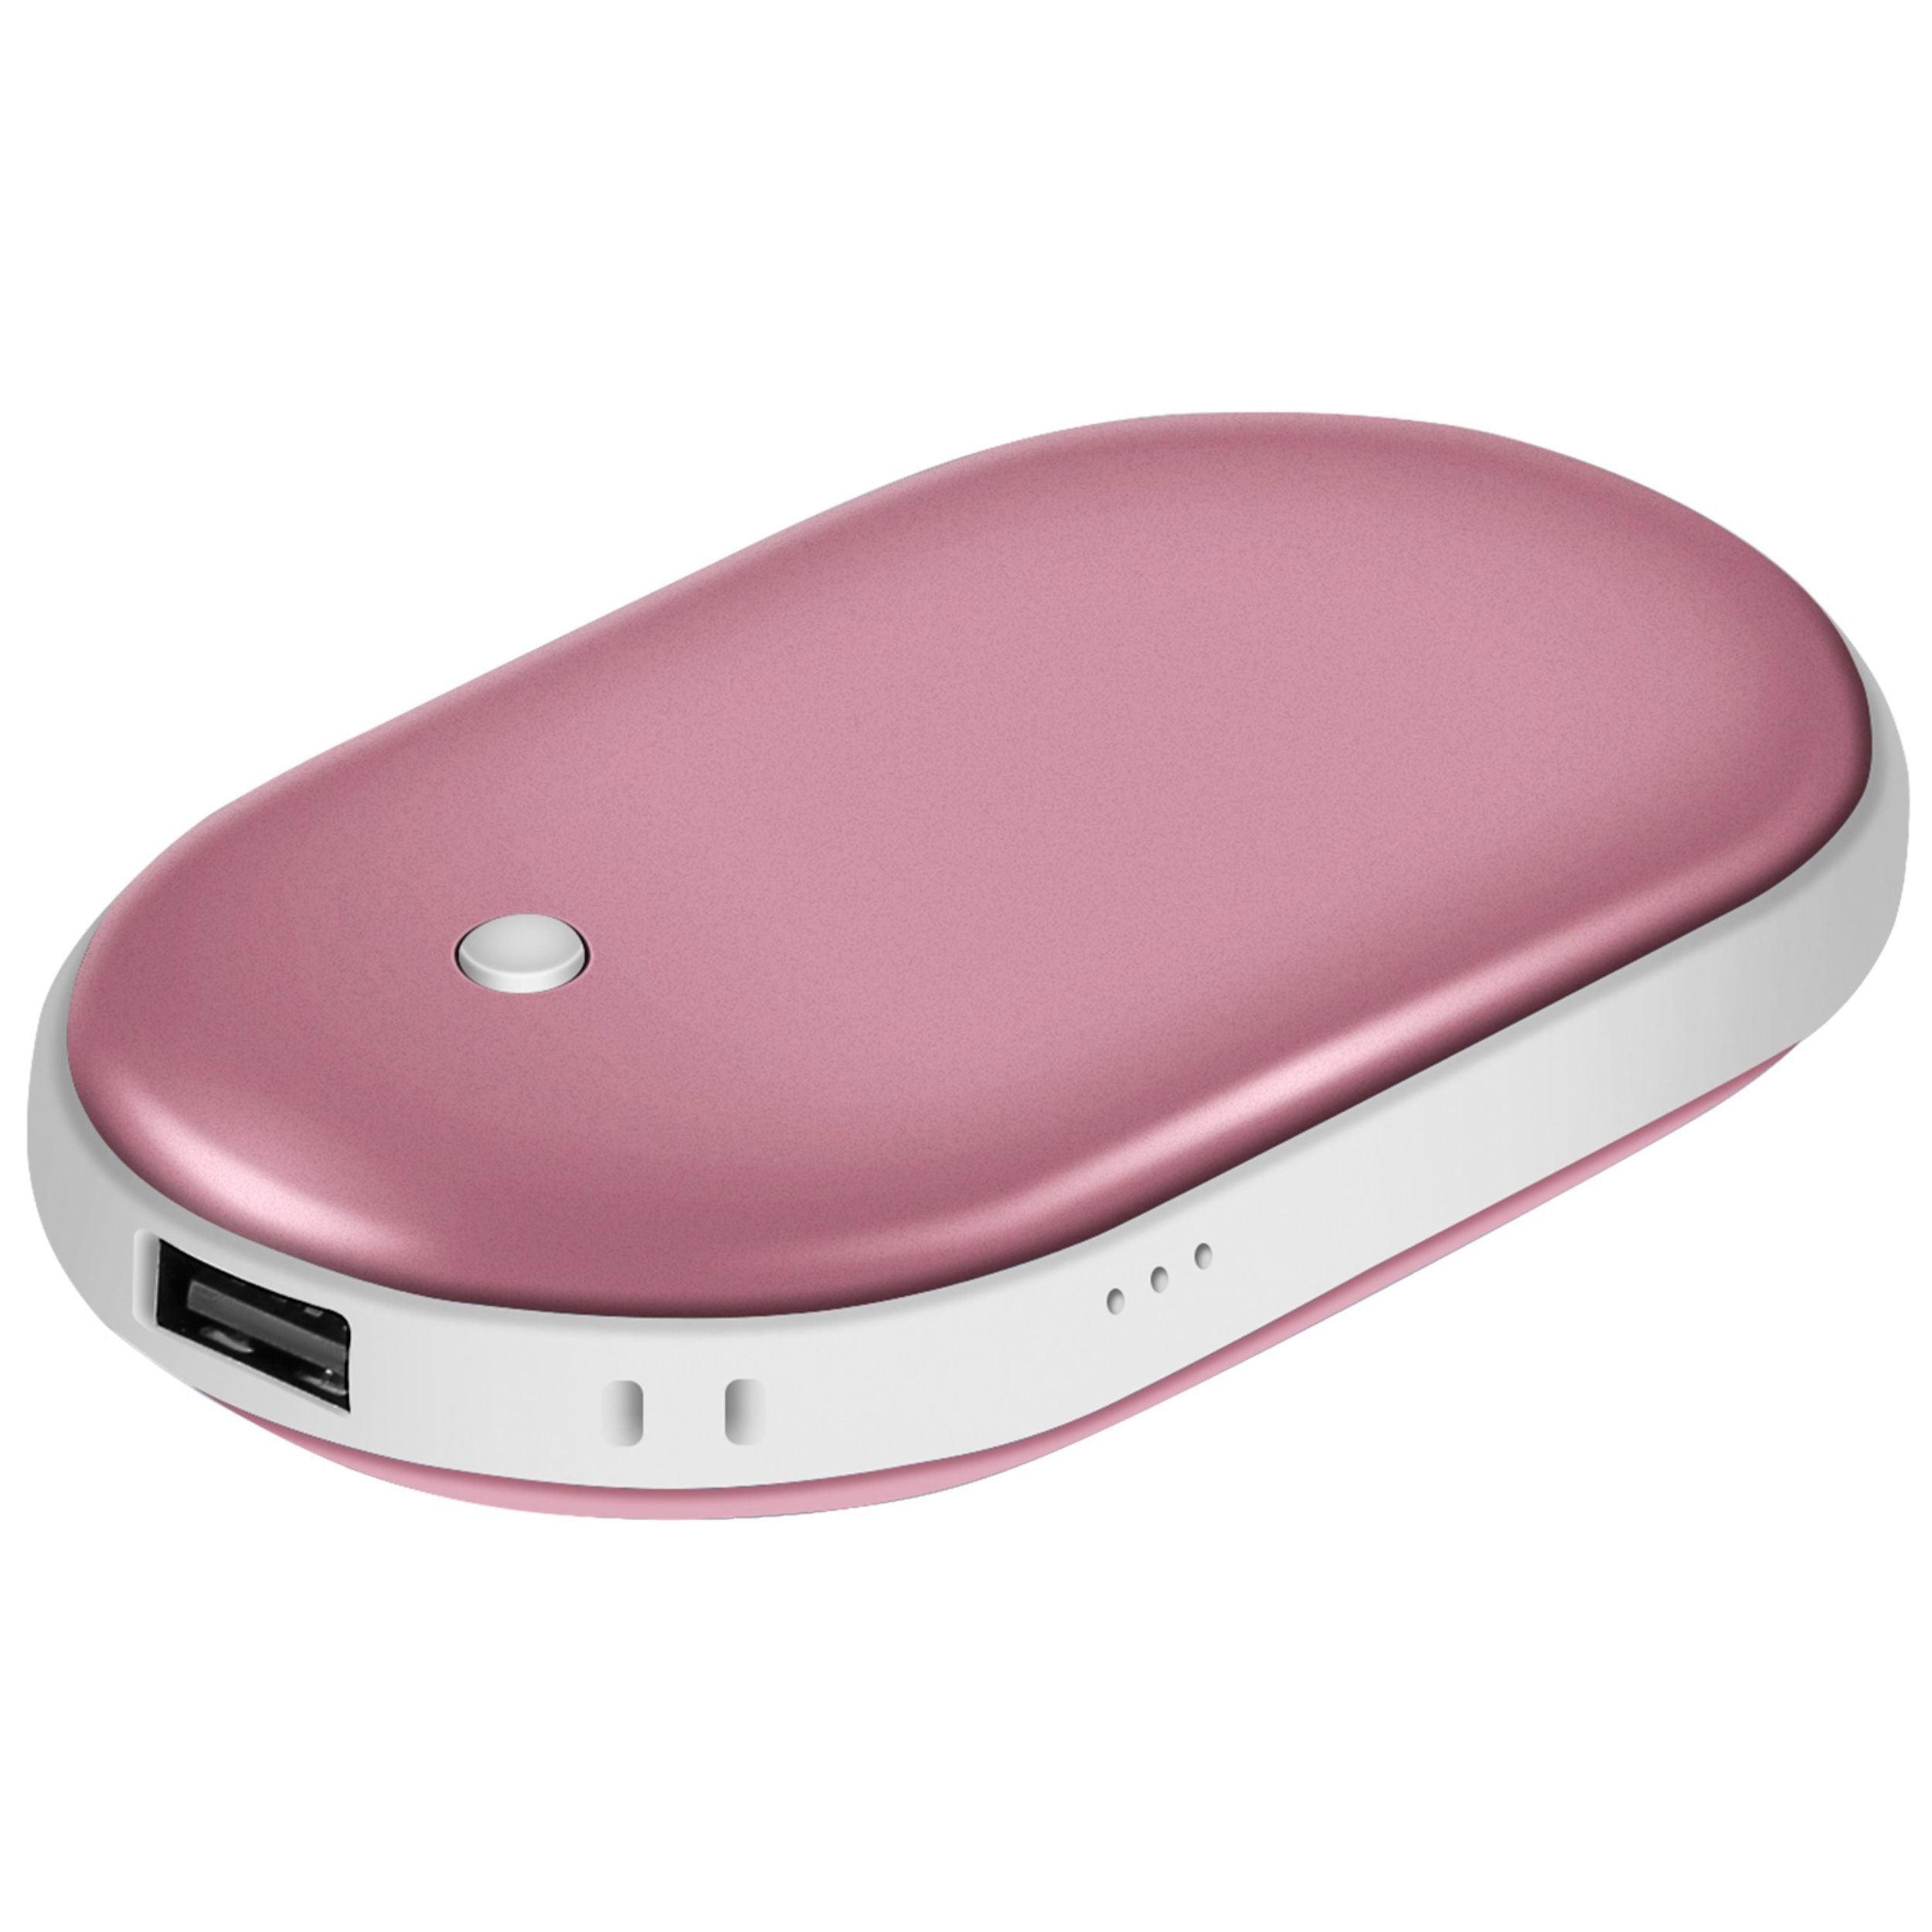 title:5000mAh Portable Hand Warmer & Power Bank - Rechargeable, Double-Sided Heating, Pocket Size;color:Rose Gold